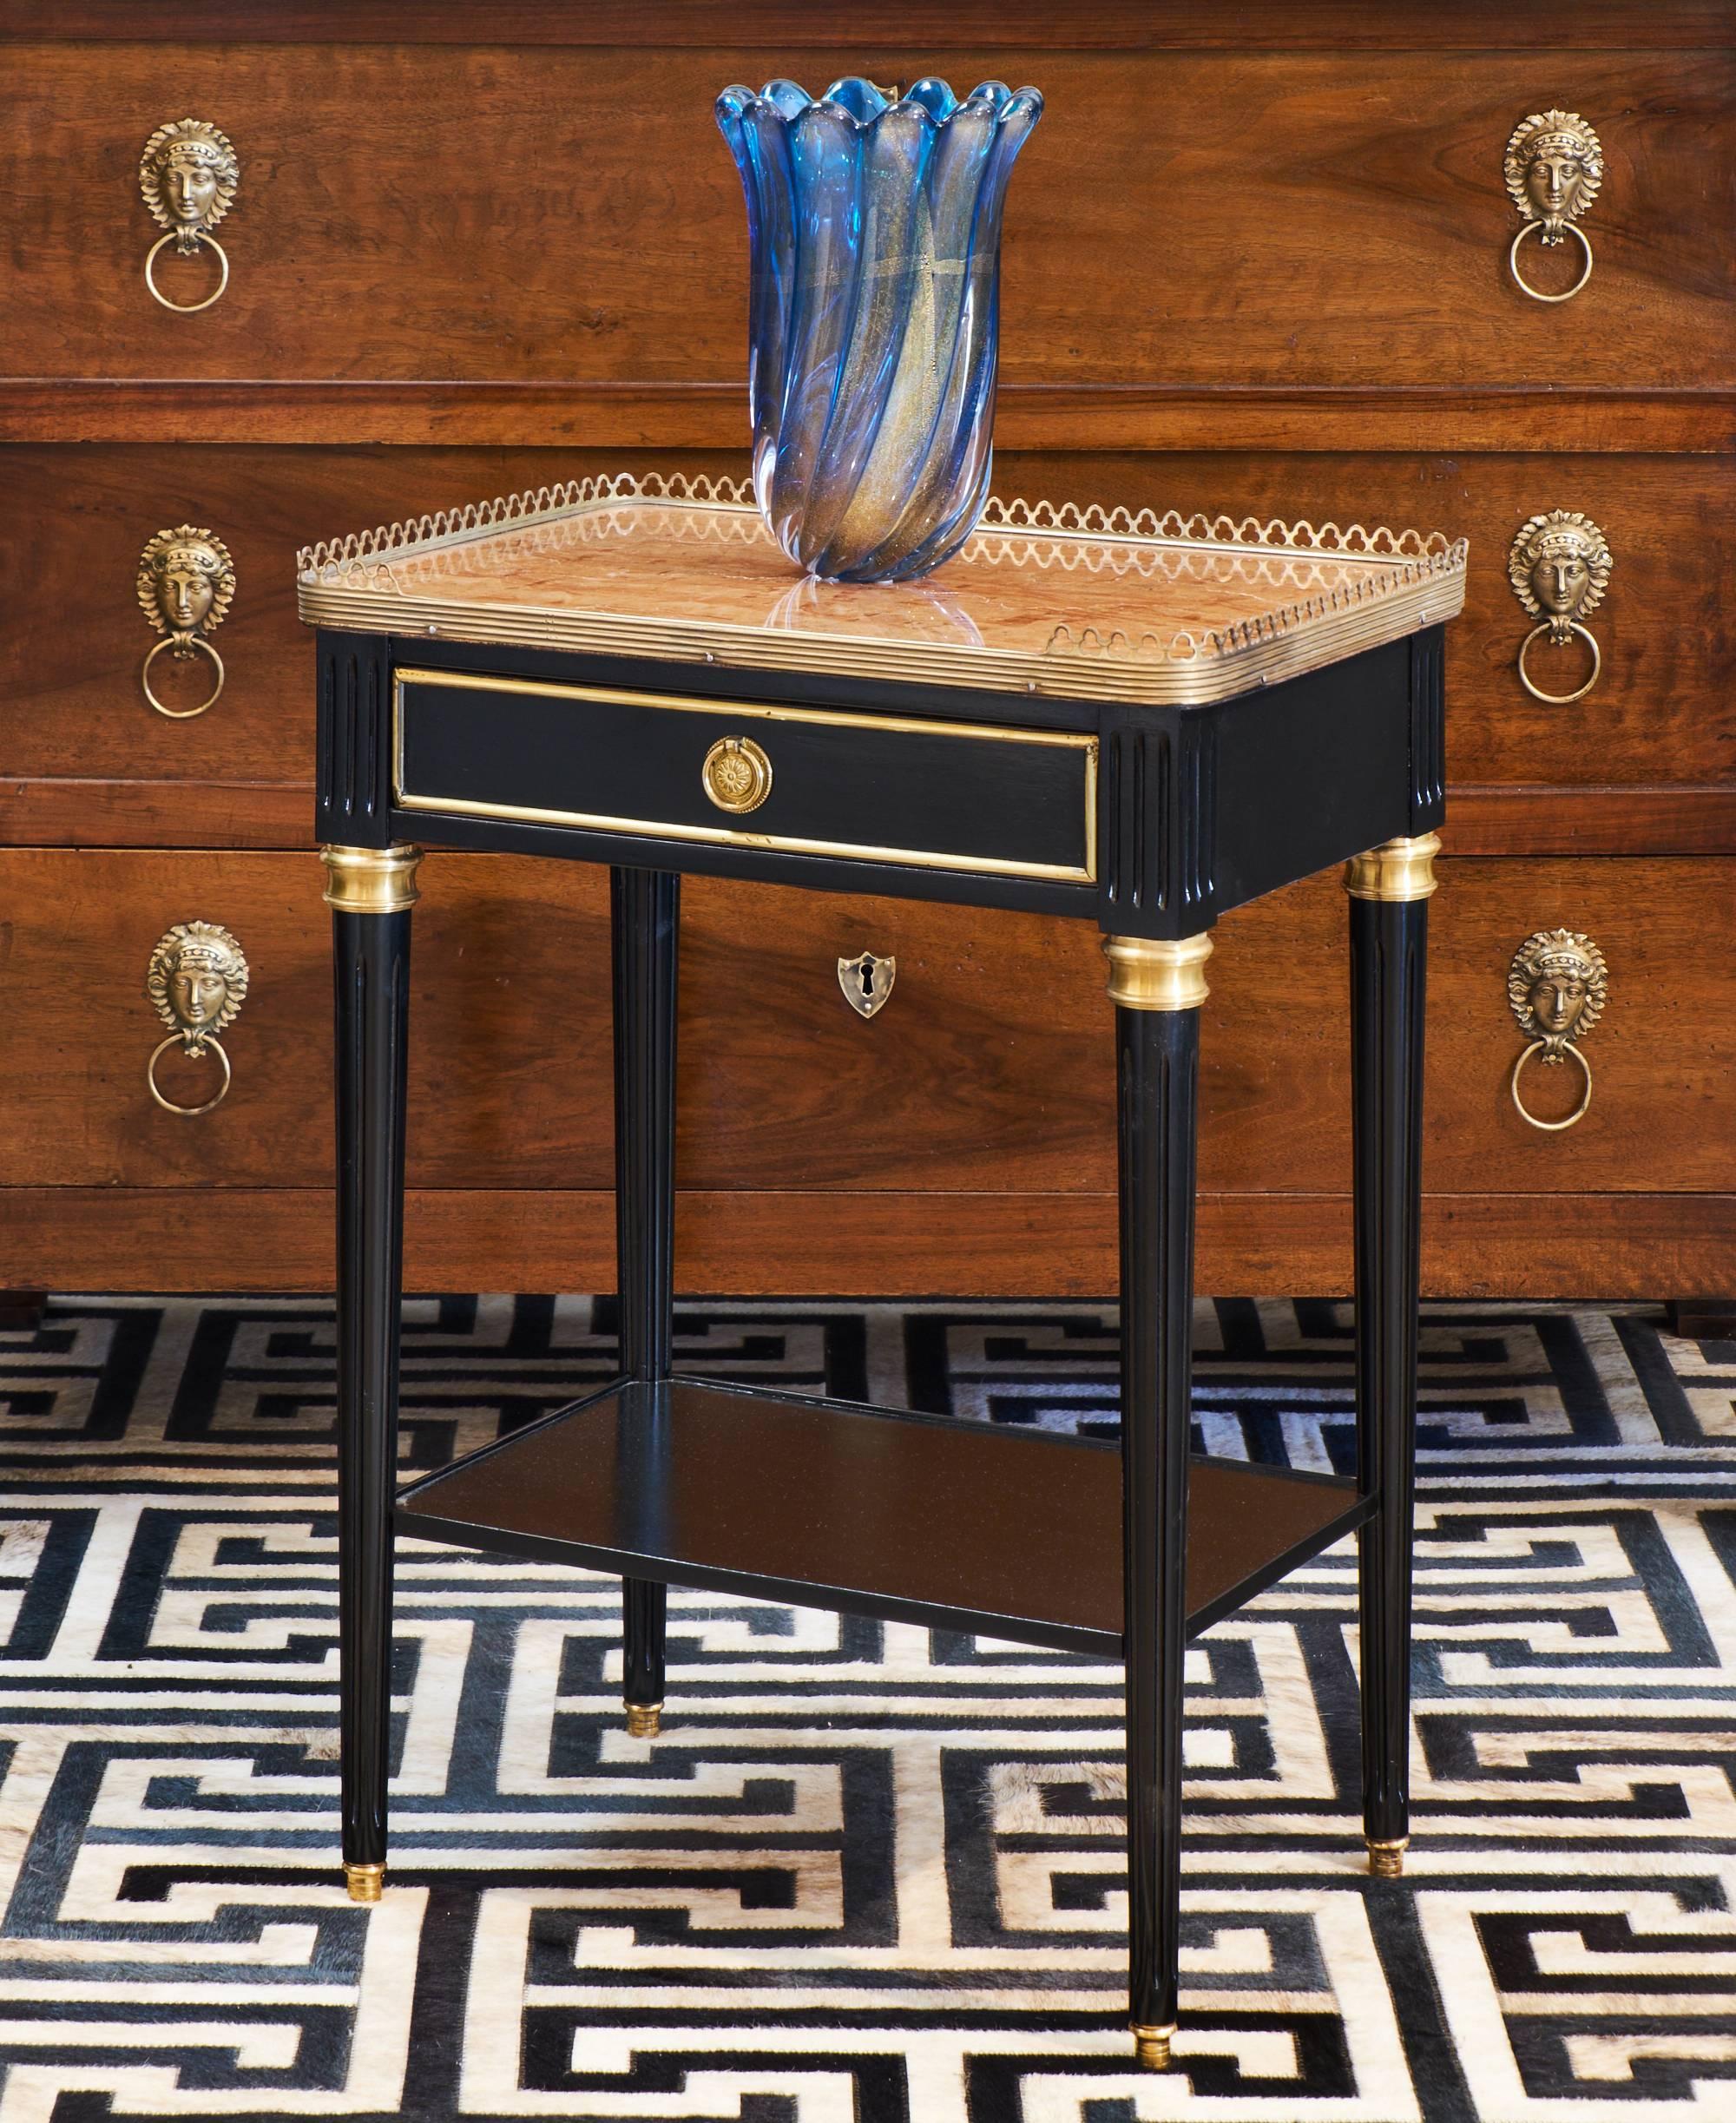 Antique French Louis XVI style side table of ebonized mahogany with a lustrous French polish finish, fluted and tapered legs, brass details, and a lovely 